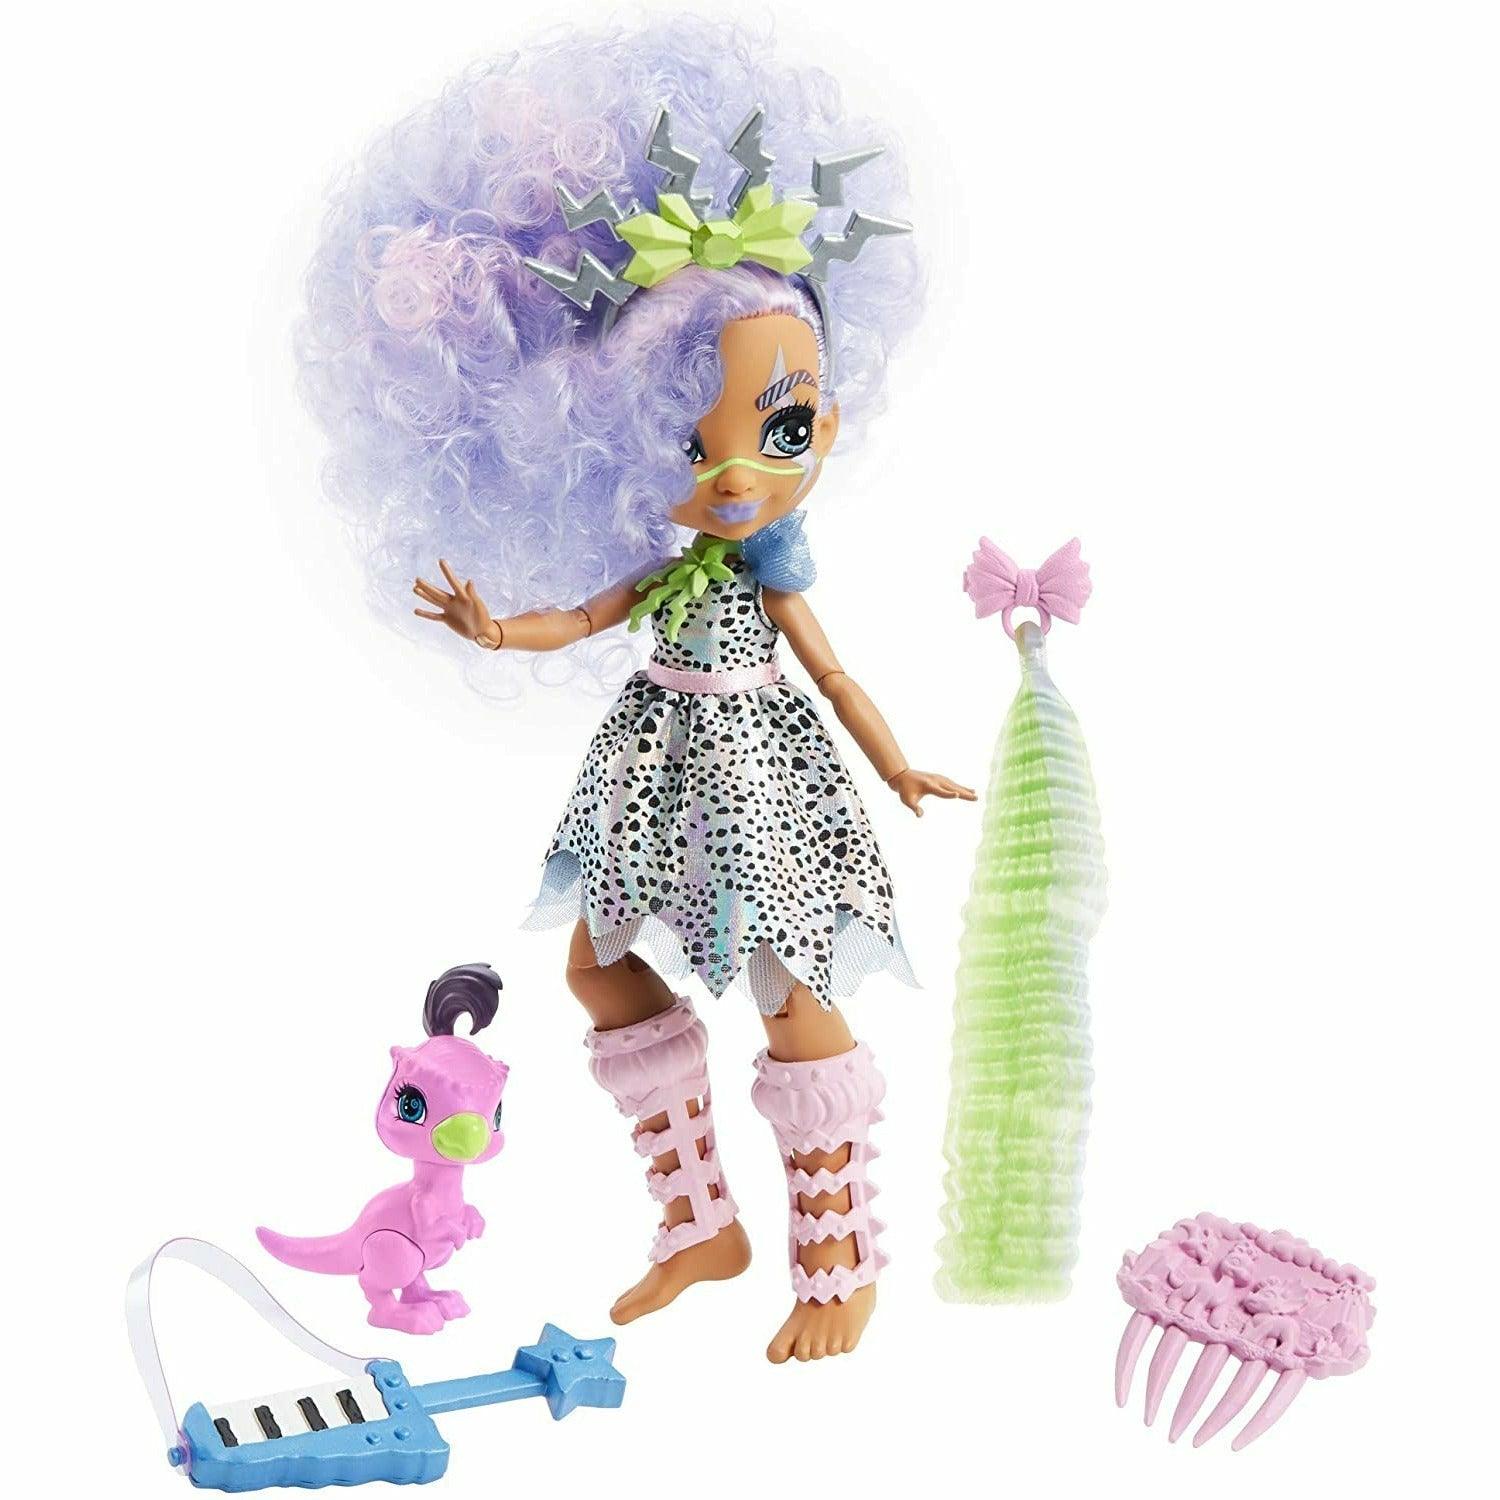 Cave Club Bashley Doll (8 - 10-inch, Lavender Hair) Poseable Prehistoric Fashion Doll with Dinosaur Pet and Accessories - BumbleToys - 4+ Years, 5-7 Years, Dolls, Fashion Dolls & Accessories, Girls, OXE